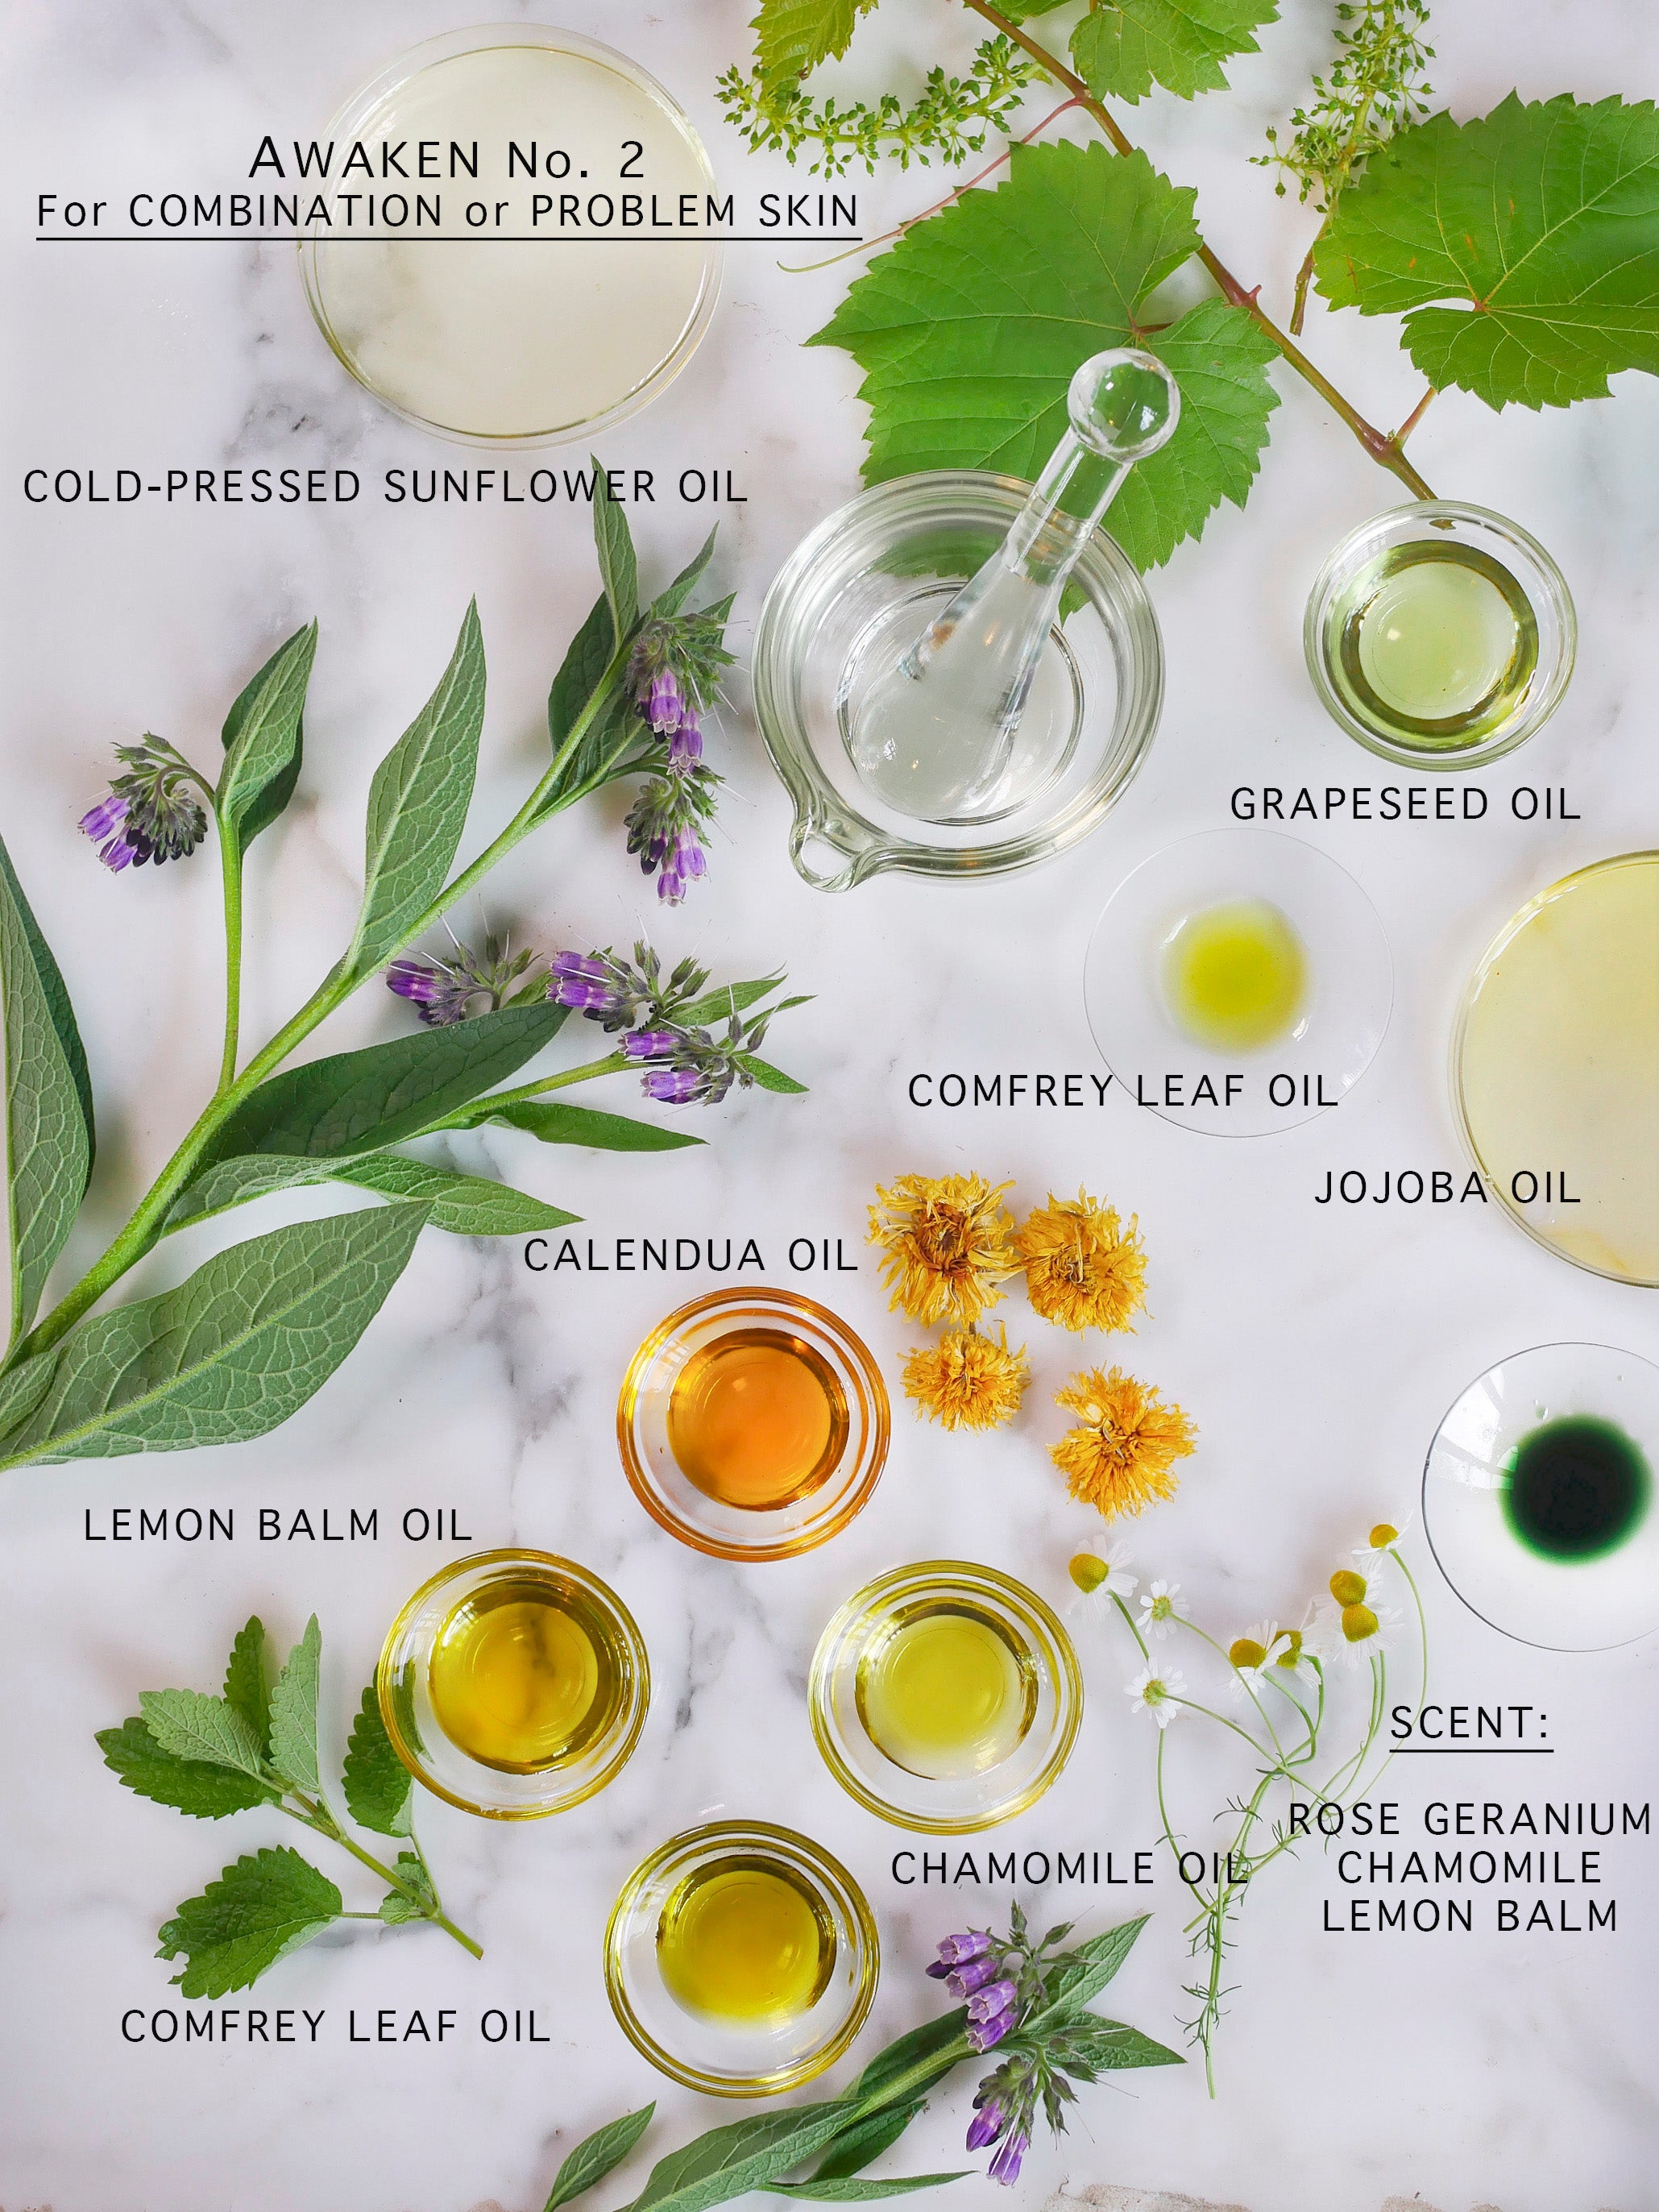 Botanical and natural ingredients that make up the best face serum for combination skin.